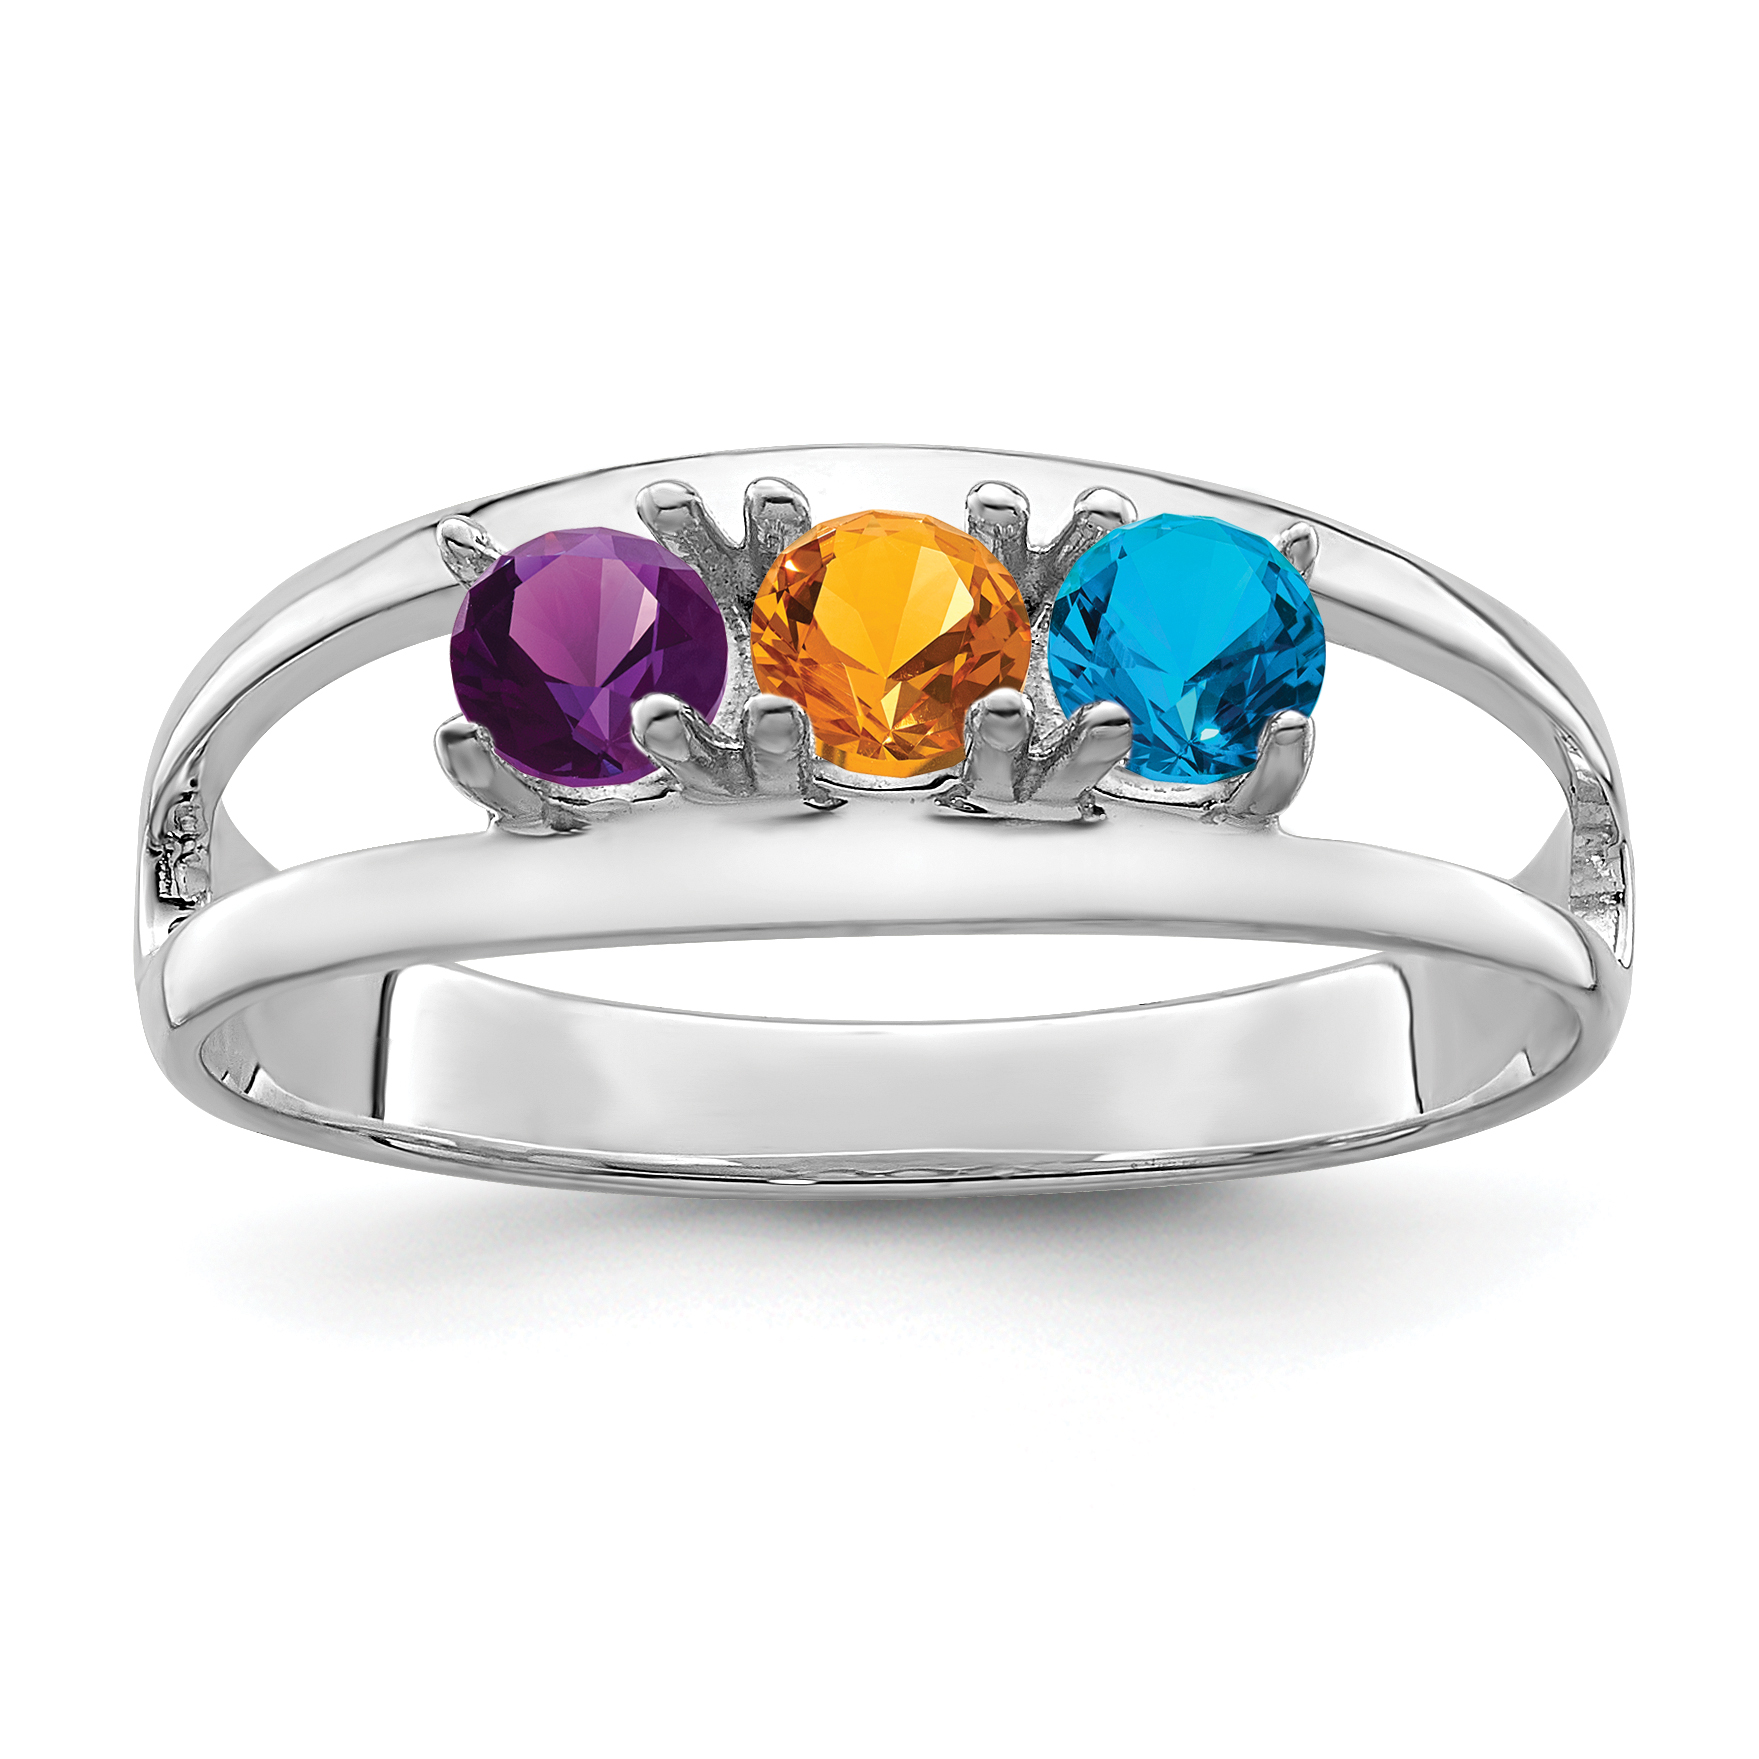 Family Celebration Sterling Silver Synthetic 3 Stone Mother's Ring